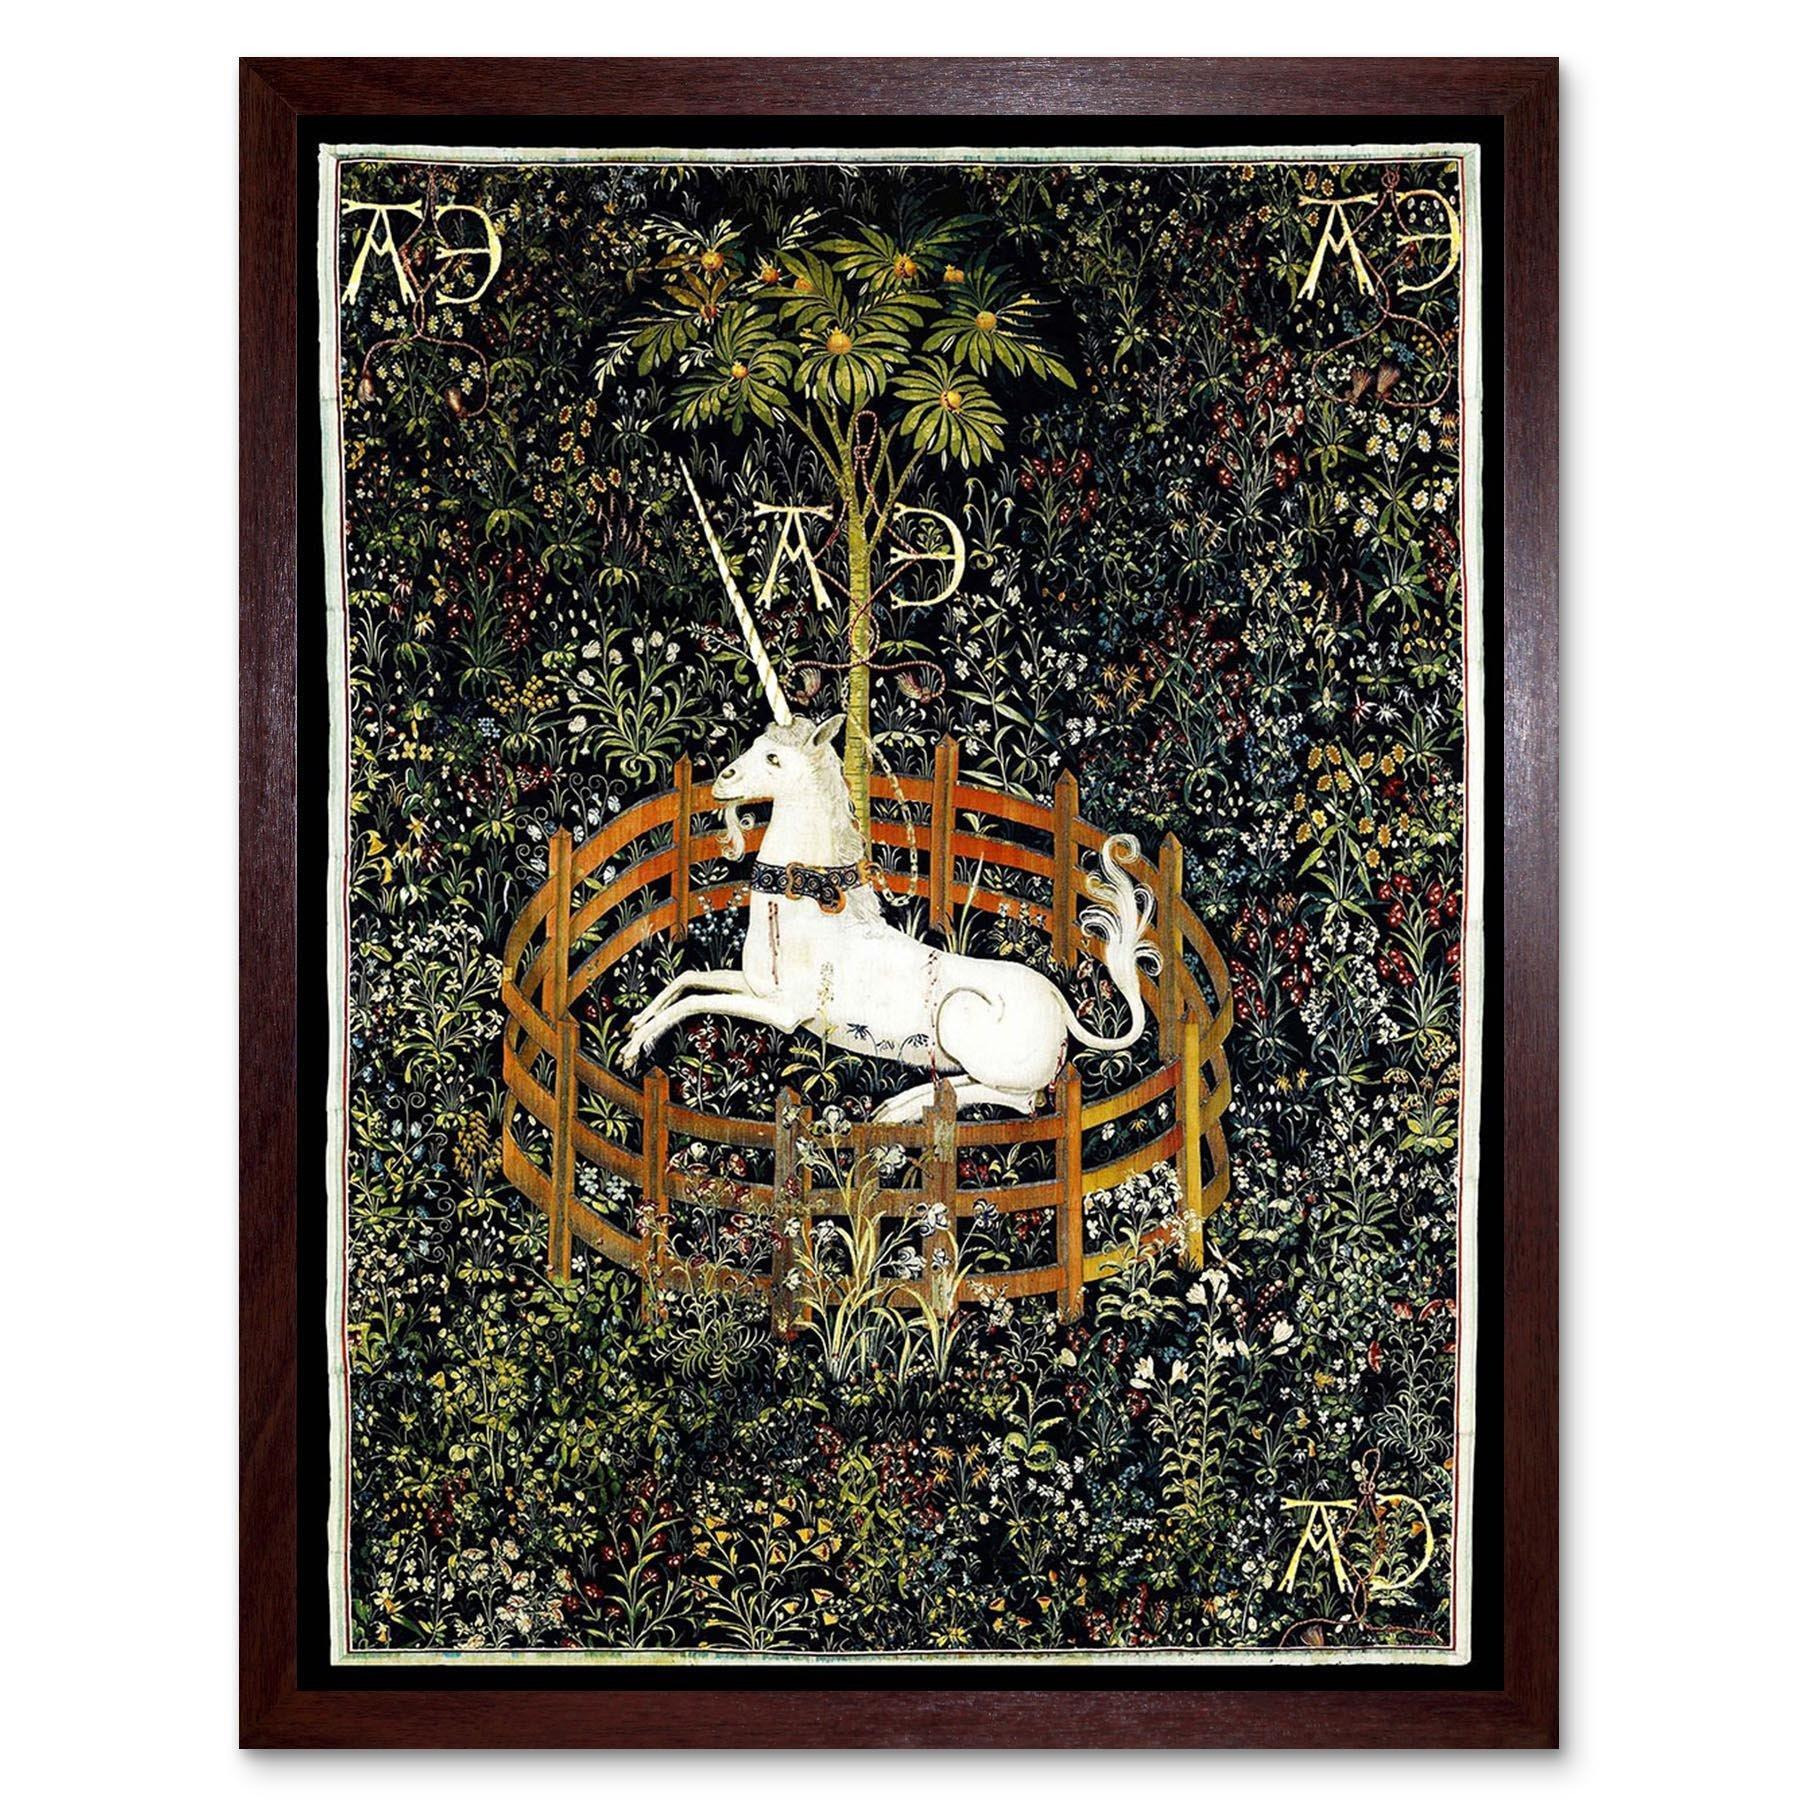 Wall Art Print Unicorn Rests in a Garden Medieval Mythical Animal Nature Art Middle Ages Tapestry Art Framed - image 1